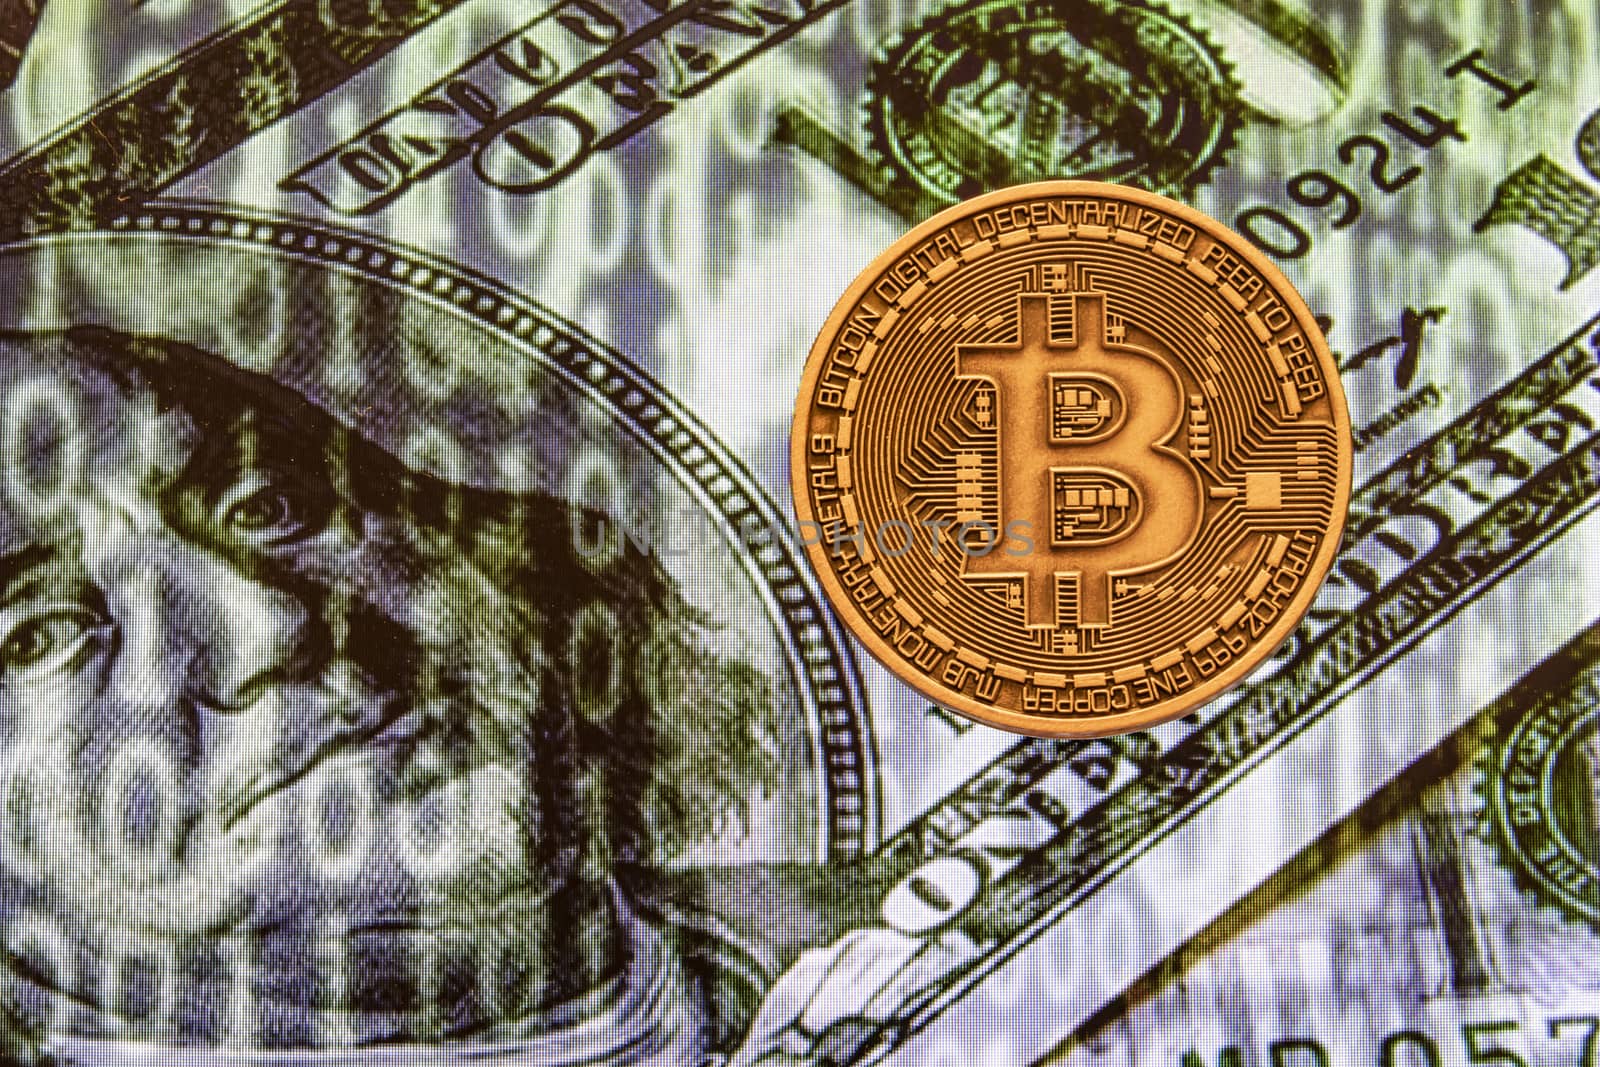 Bitcoin is a decentralized digital currency without a central bank or single administrator.